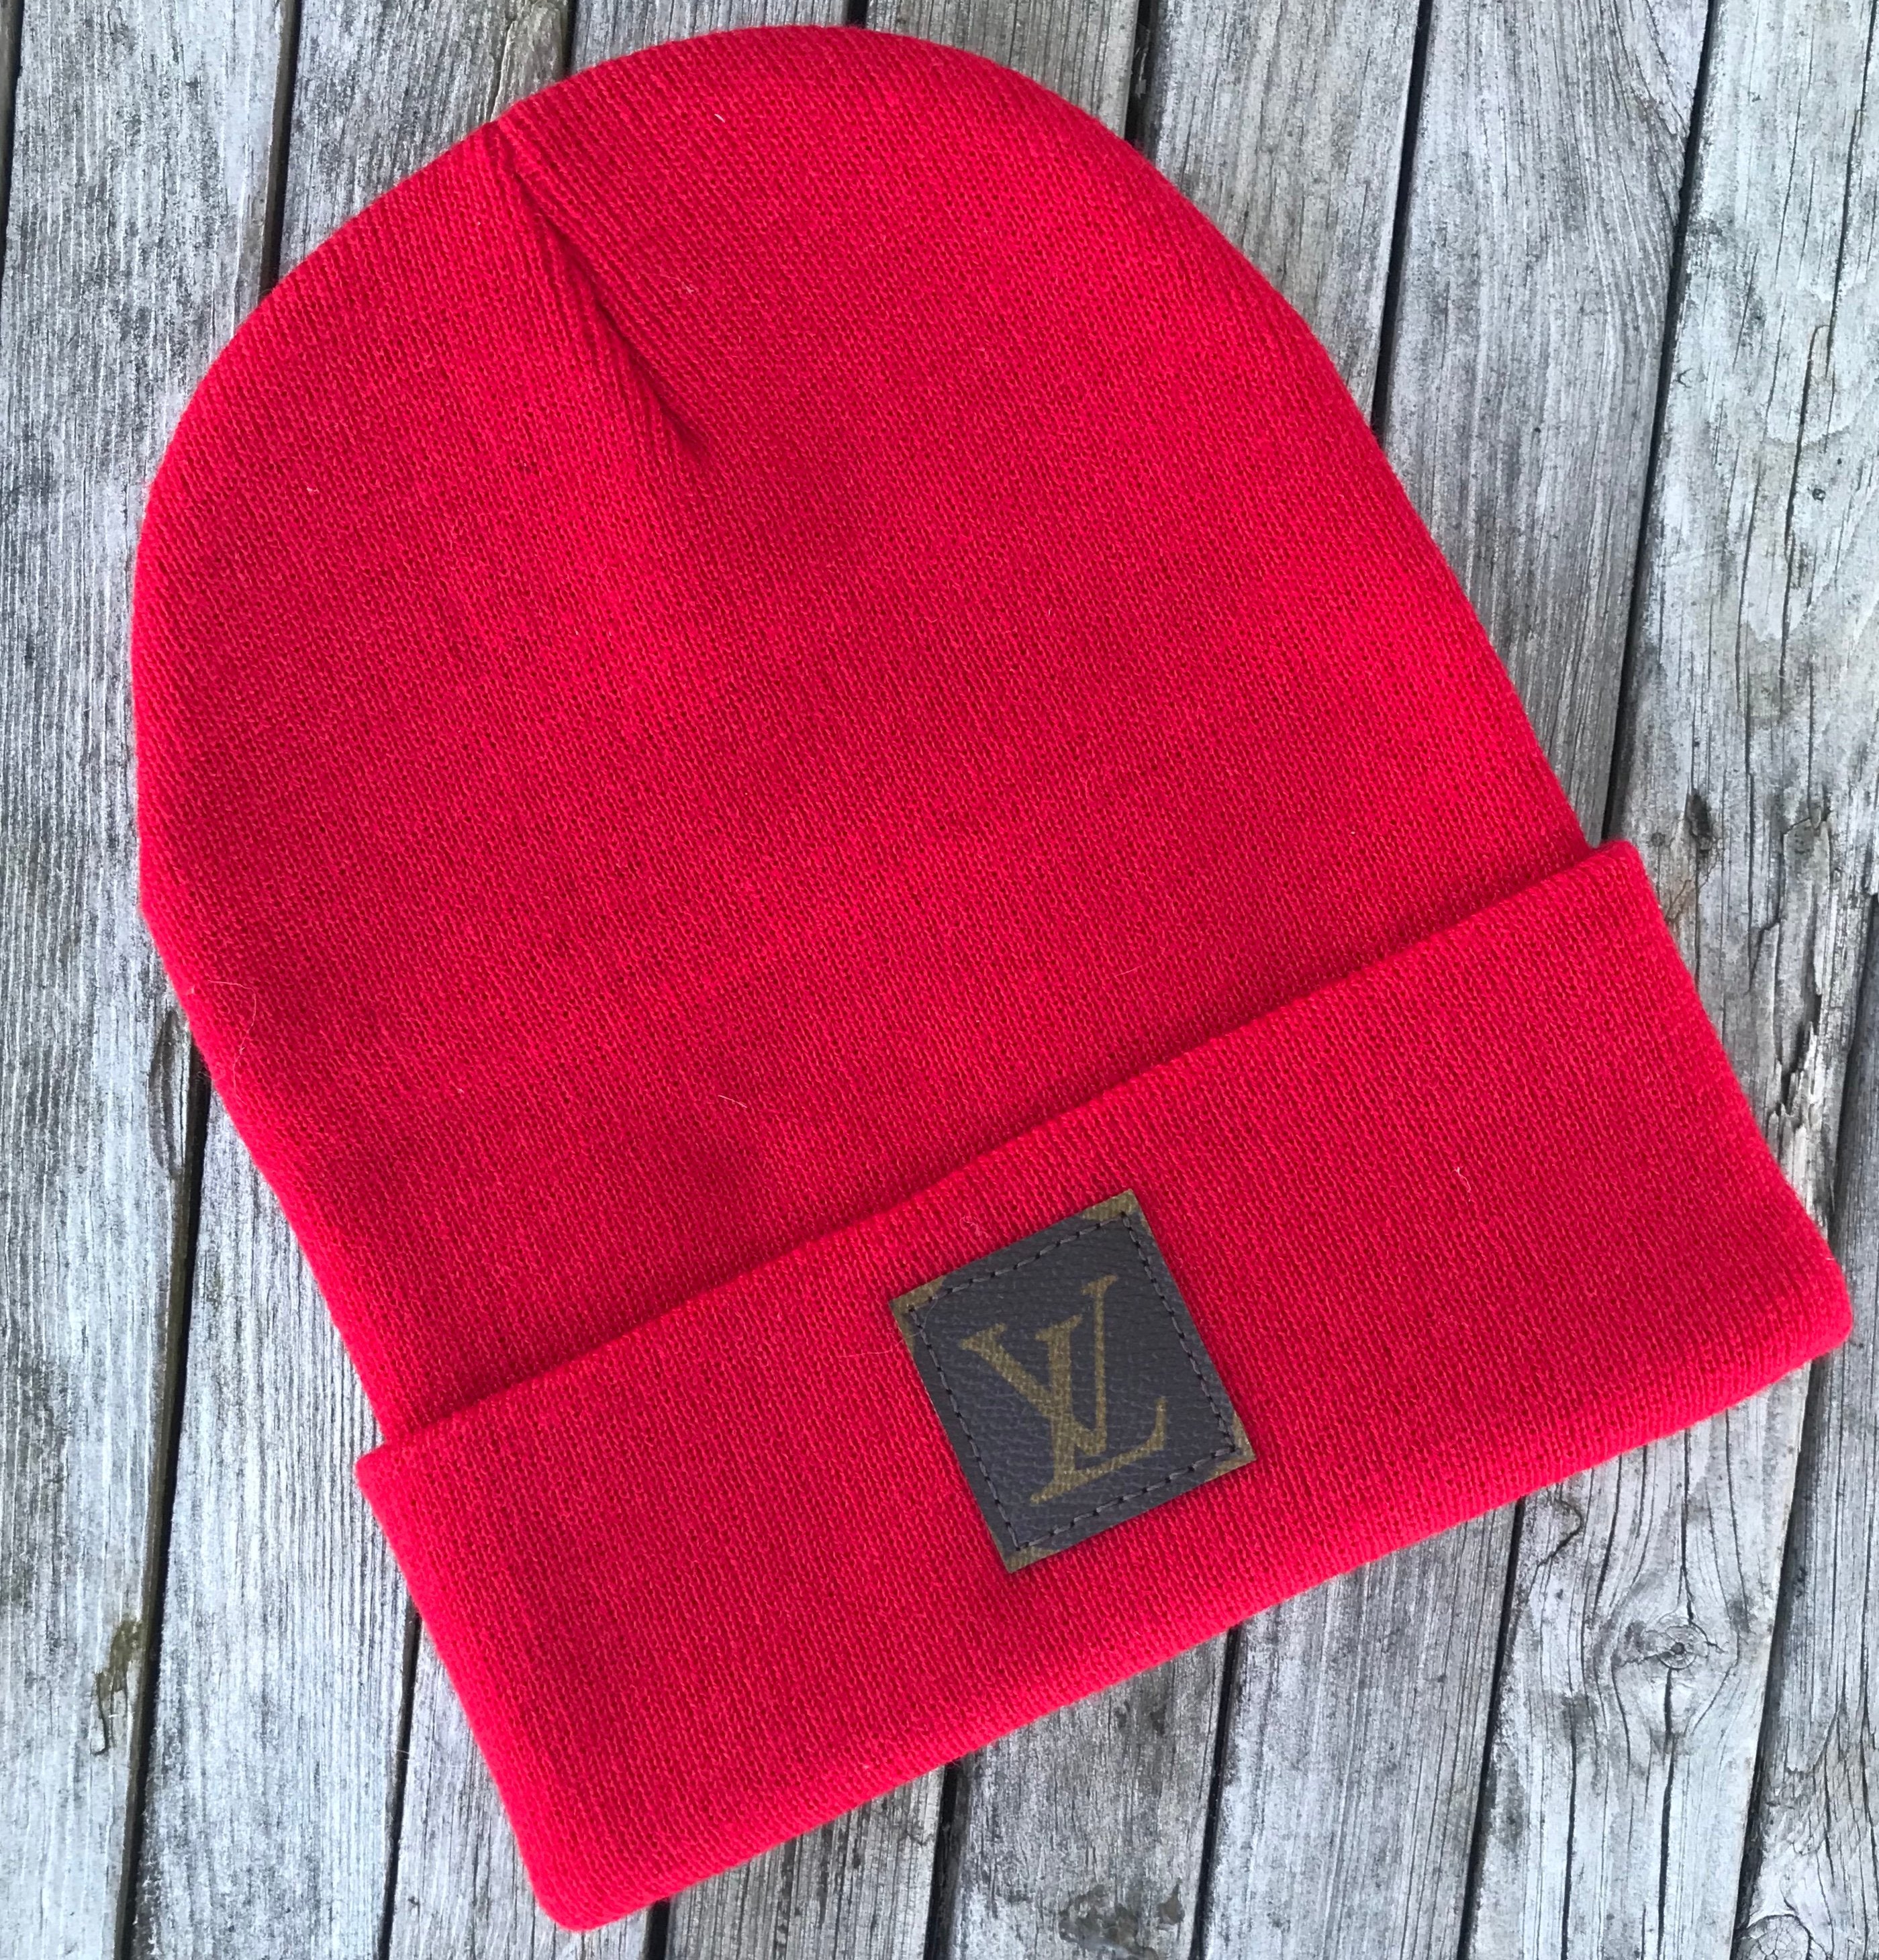 Lv beanie for sale in Co. Carlow for €35 on DoneDeal